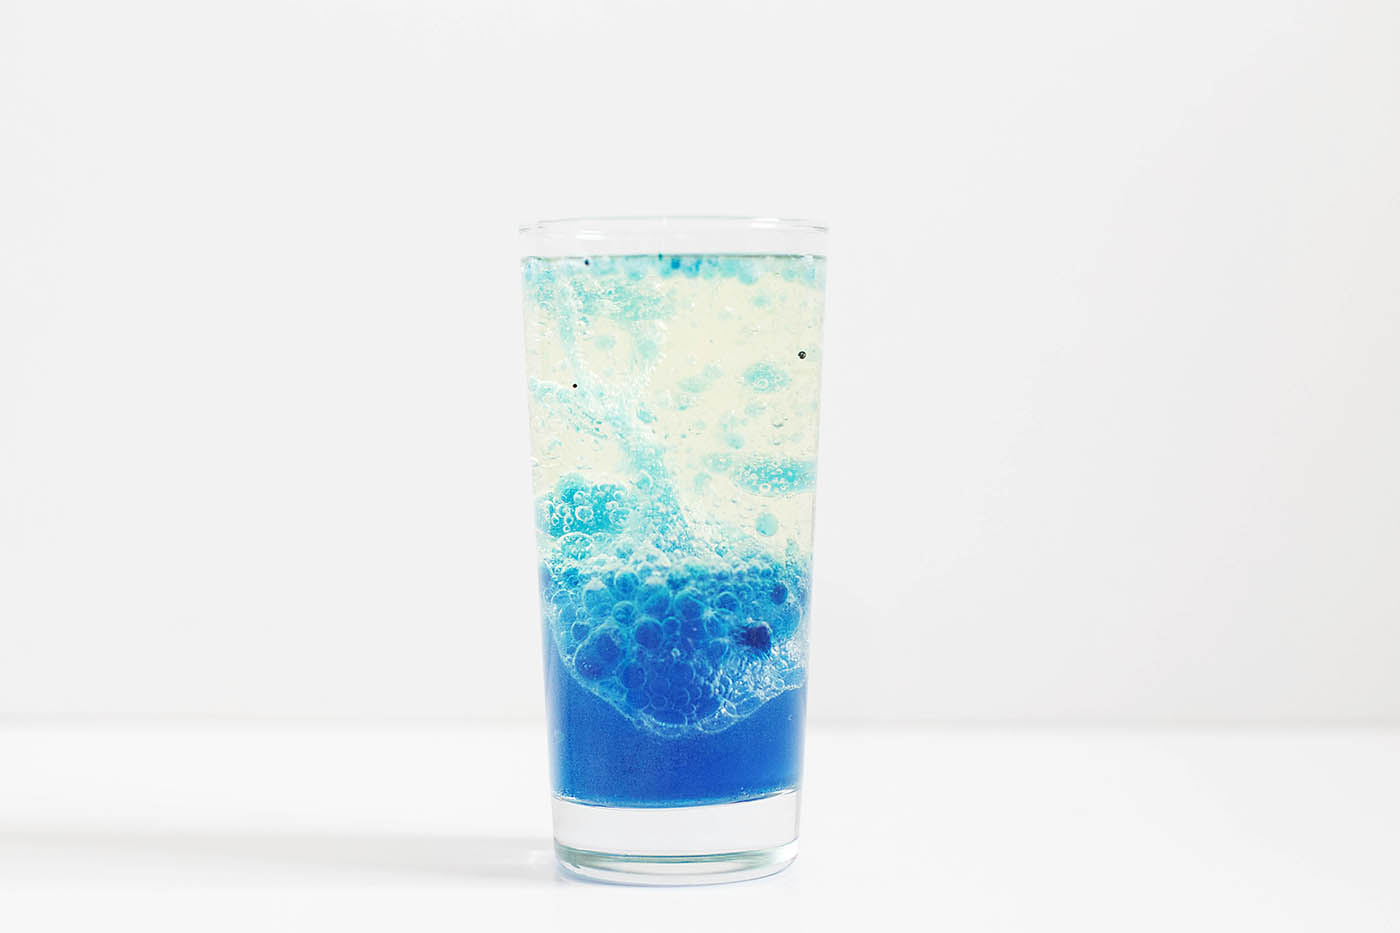 A glass against a white background with a blue homemade laval lamp inside.